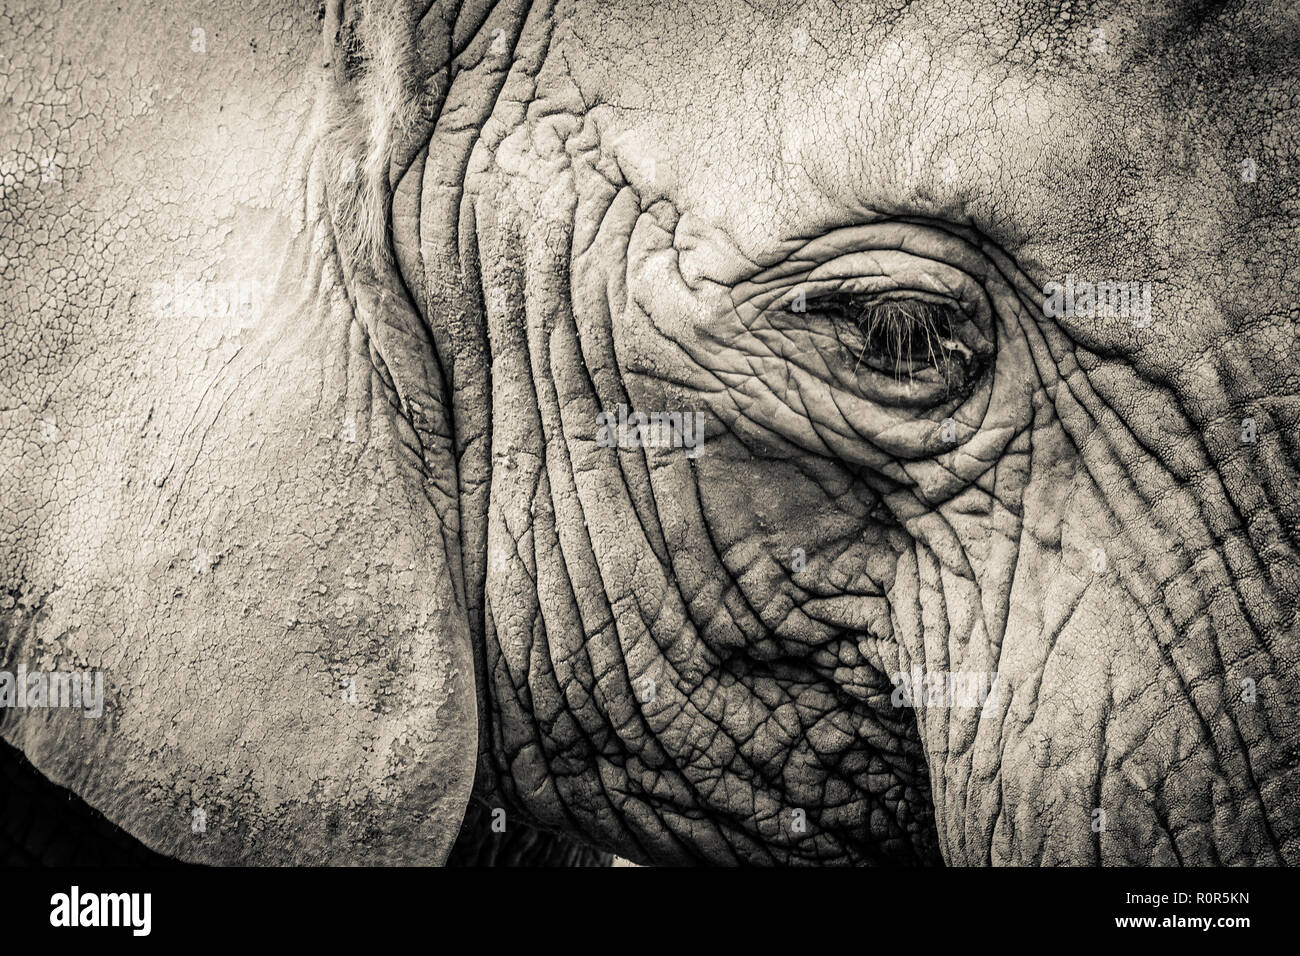 Elephant close-up with sad expression. The head of an elephant close-up. Vintage, grunge old retro style photo. Stock Photo